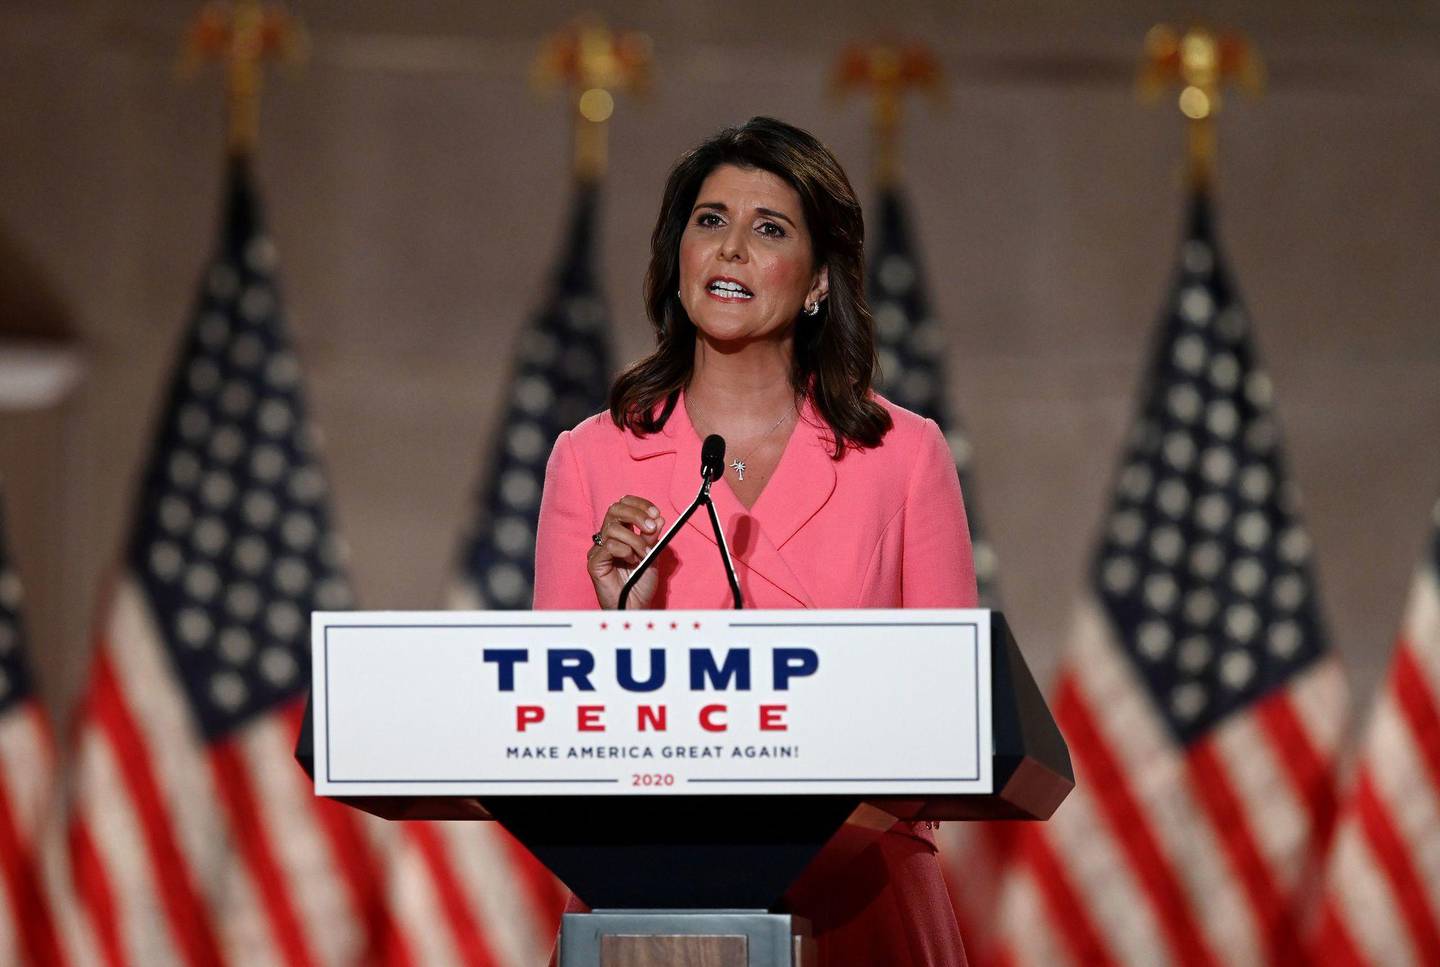 Former Ambassador to the United Nations Nikki Haley speaks during the first day of the Republican convention at the Mellon auditorium on August 24, 2020 in Washington, DC (Photo by Olivier DOULIERY / AFP)